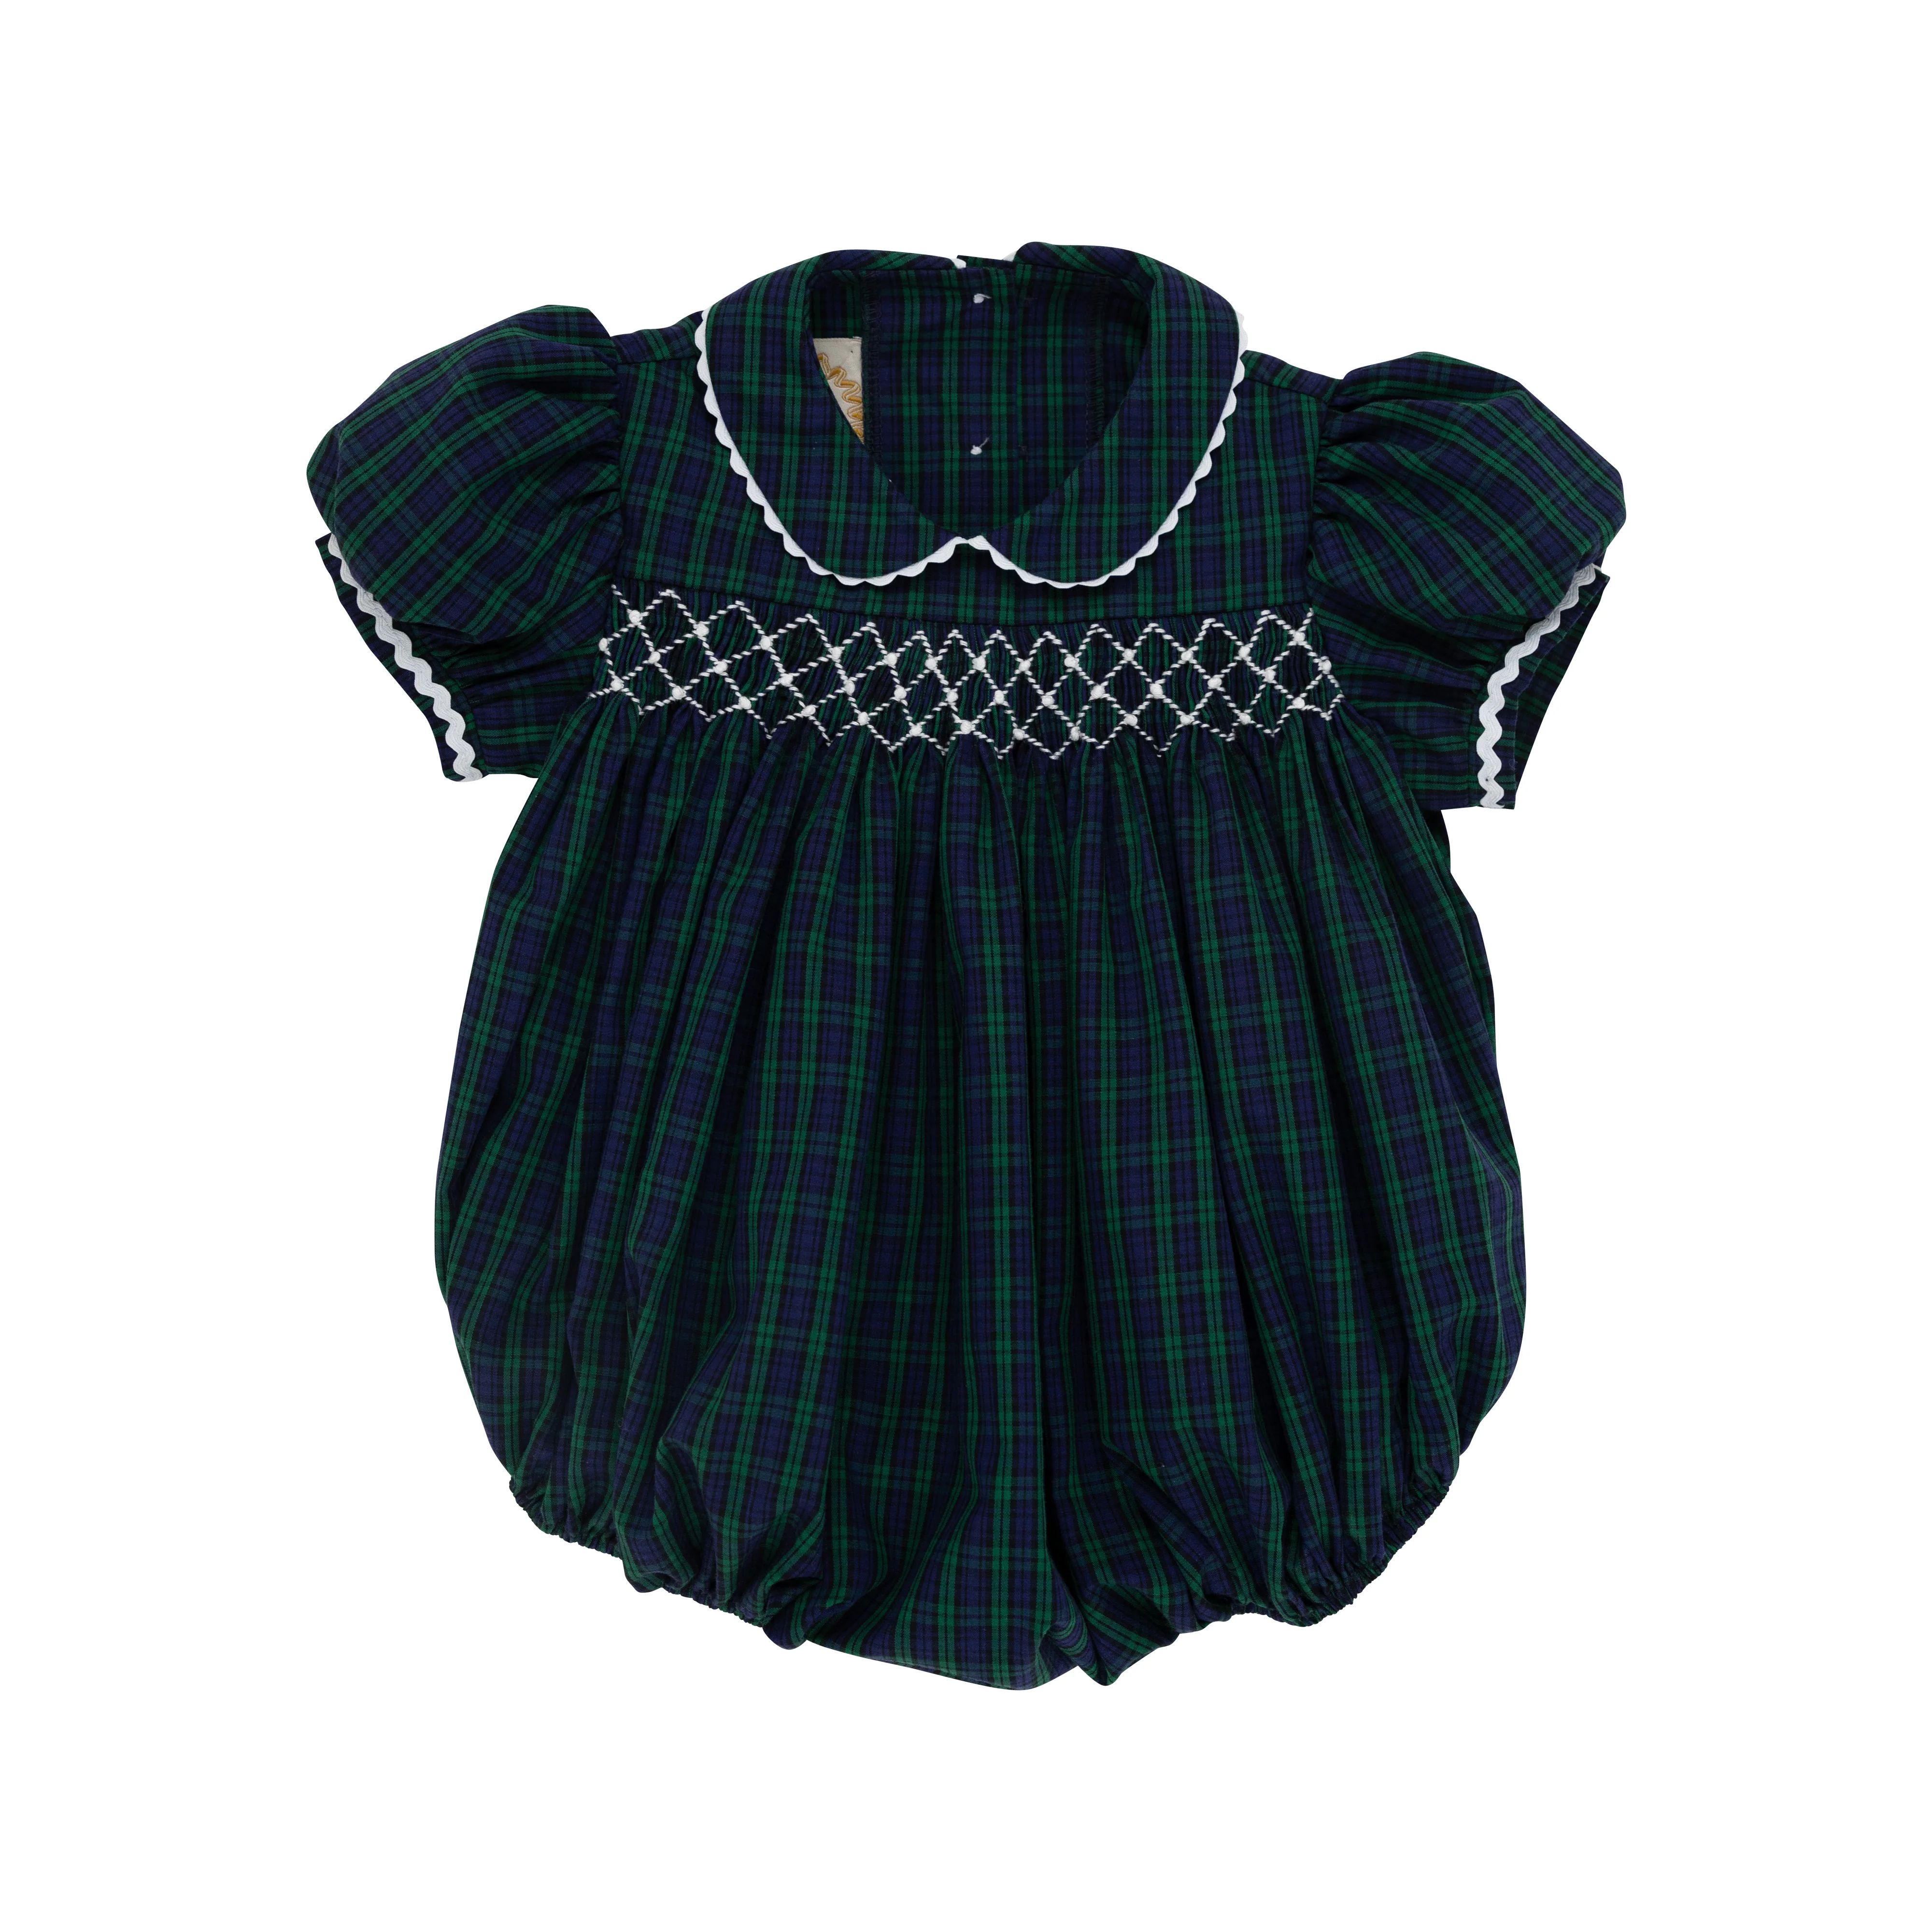 Dottie Hart Bubble - Fall Party Plaid with Worth Avenue White Smocking | The Beaufort Bonnet Company